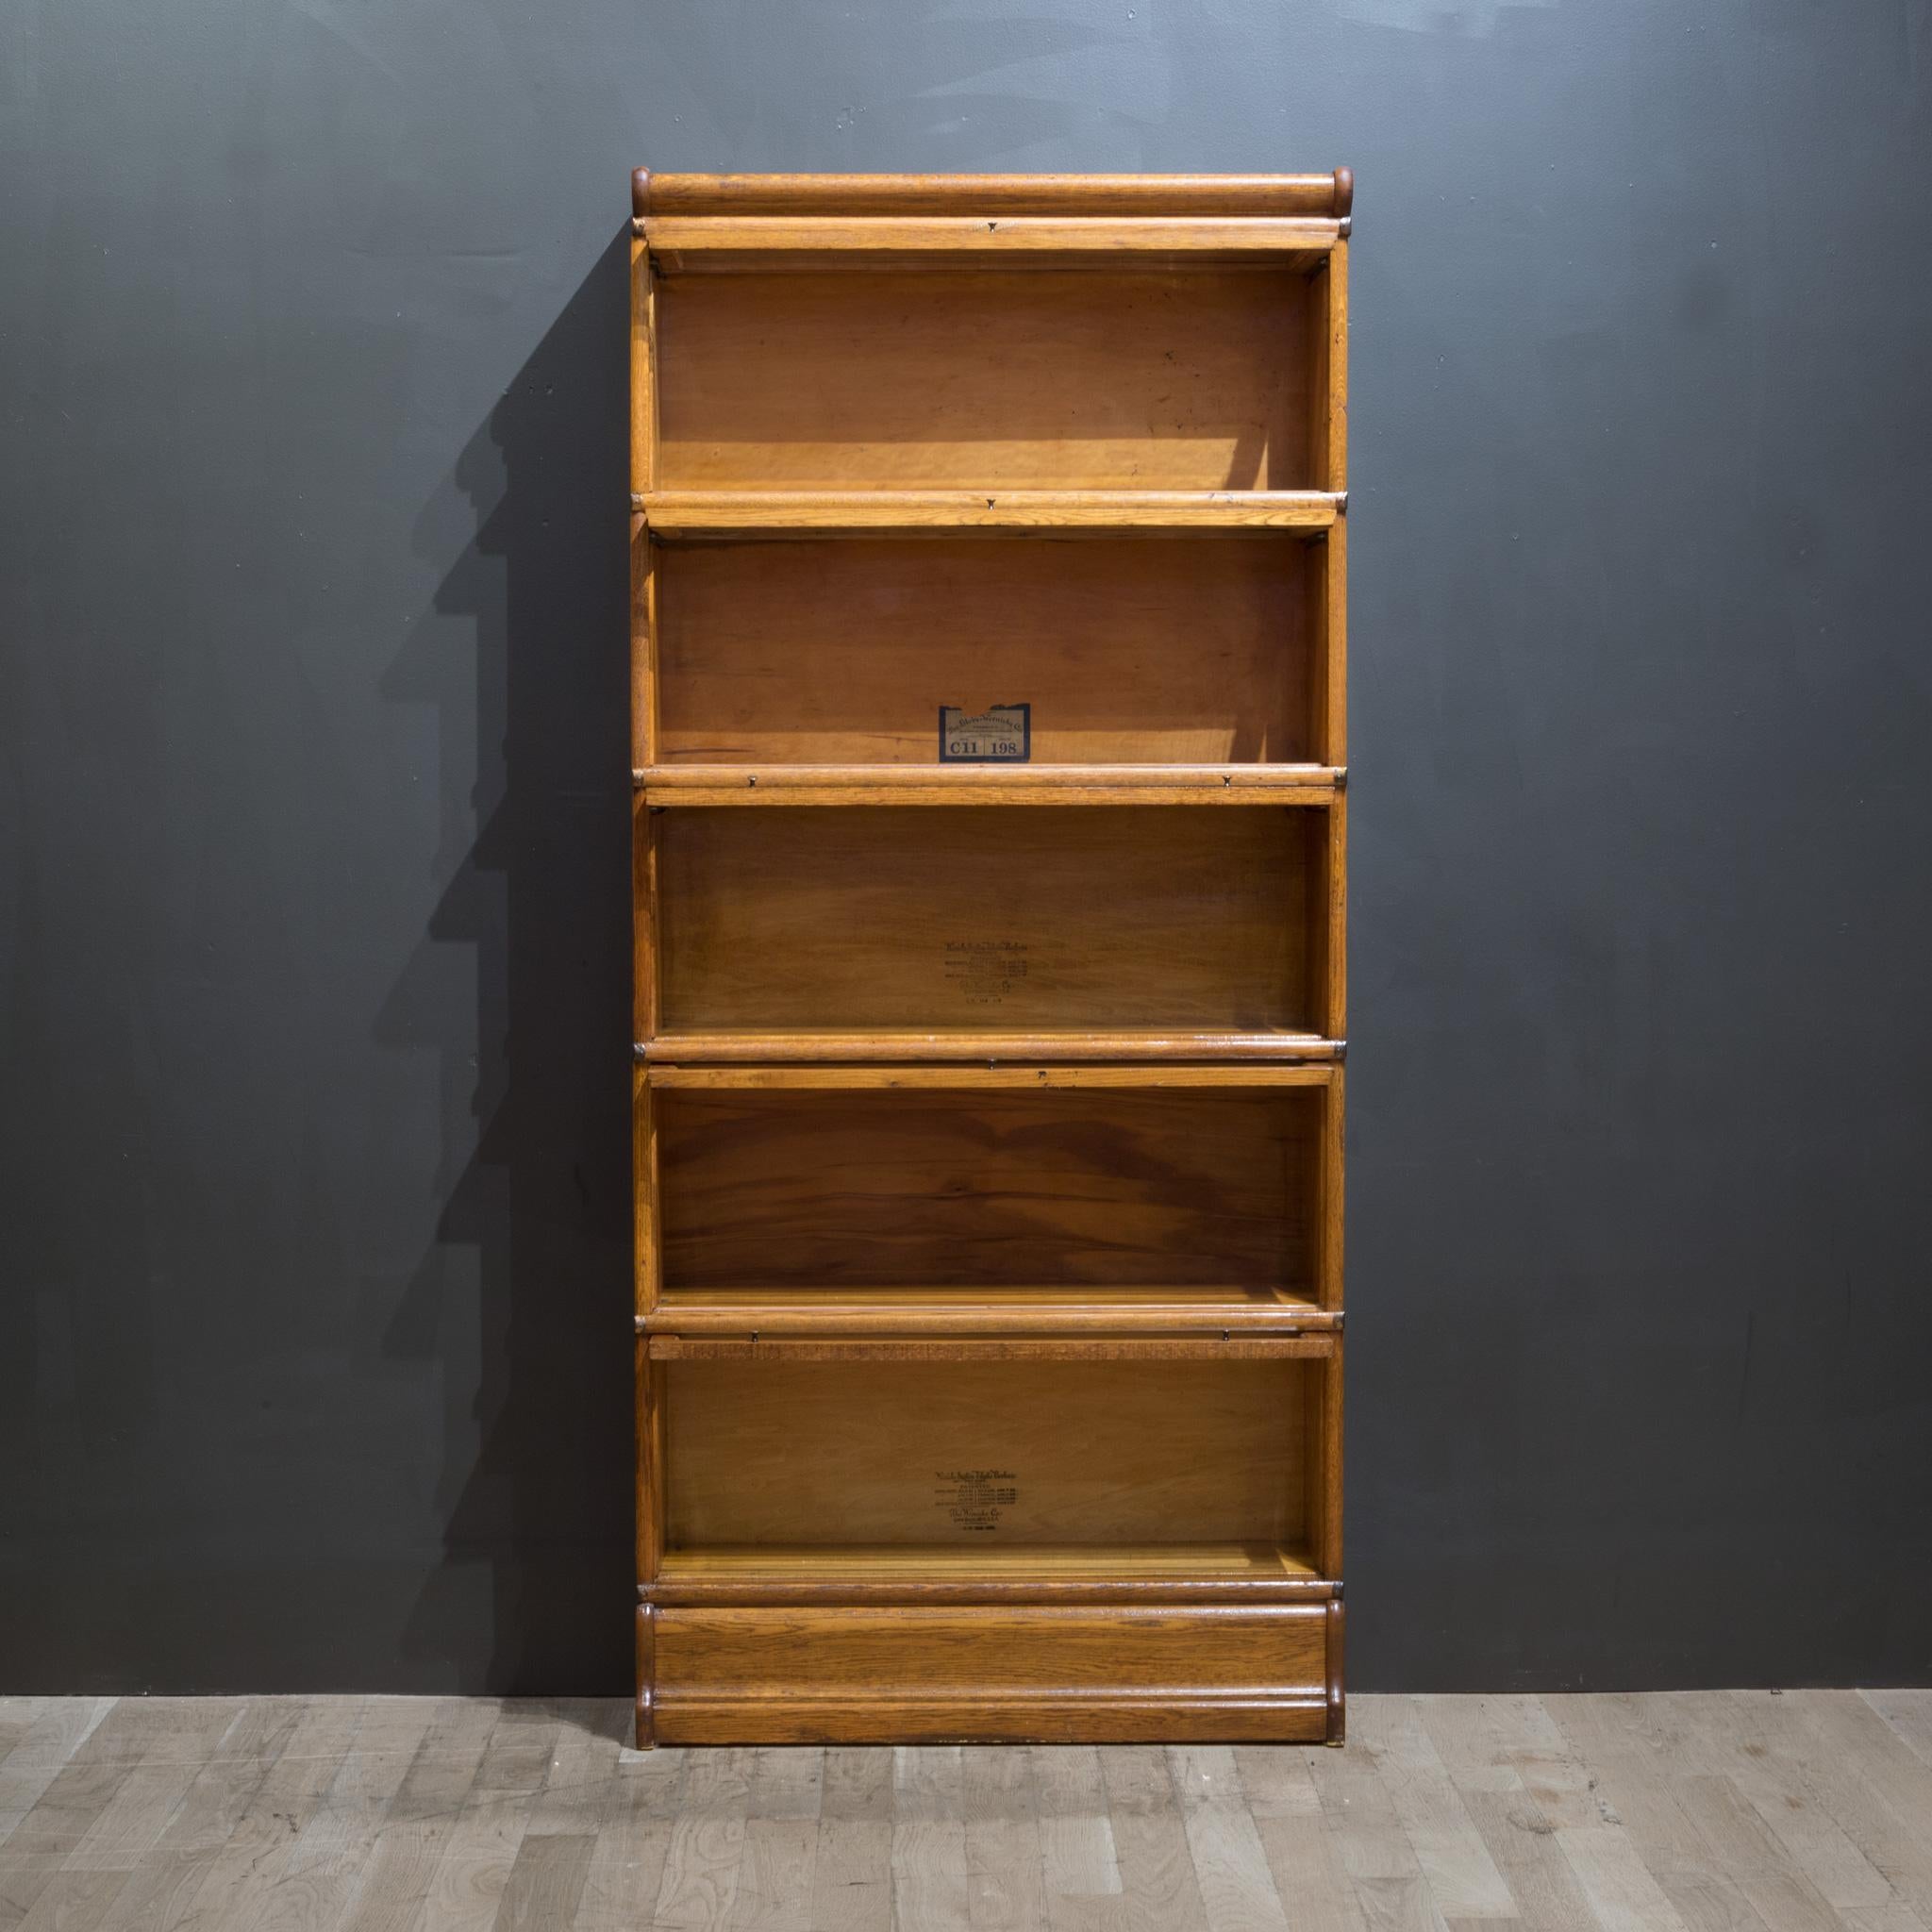 Early 20th C. Globe-Wernicke 5 Stack Lawyer's Bookcase c.1890 In Good Condition For Sale In San Francisco, CA